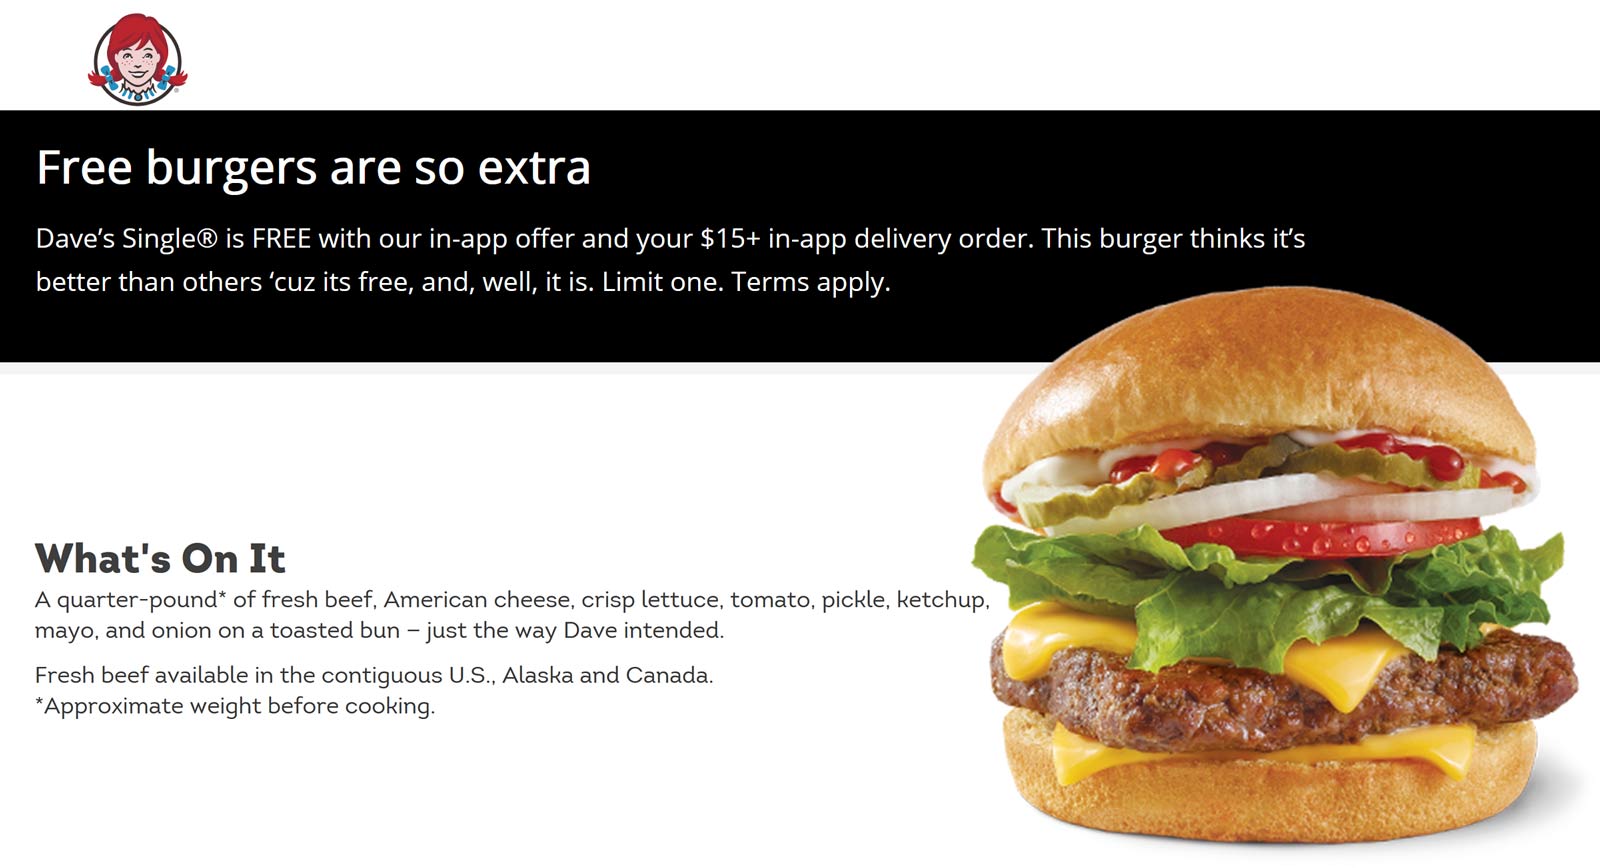 Wendys restaurants Coupon  Free single cheeseburger on $15 delivery at Wendys #wendys 